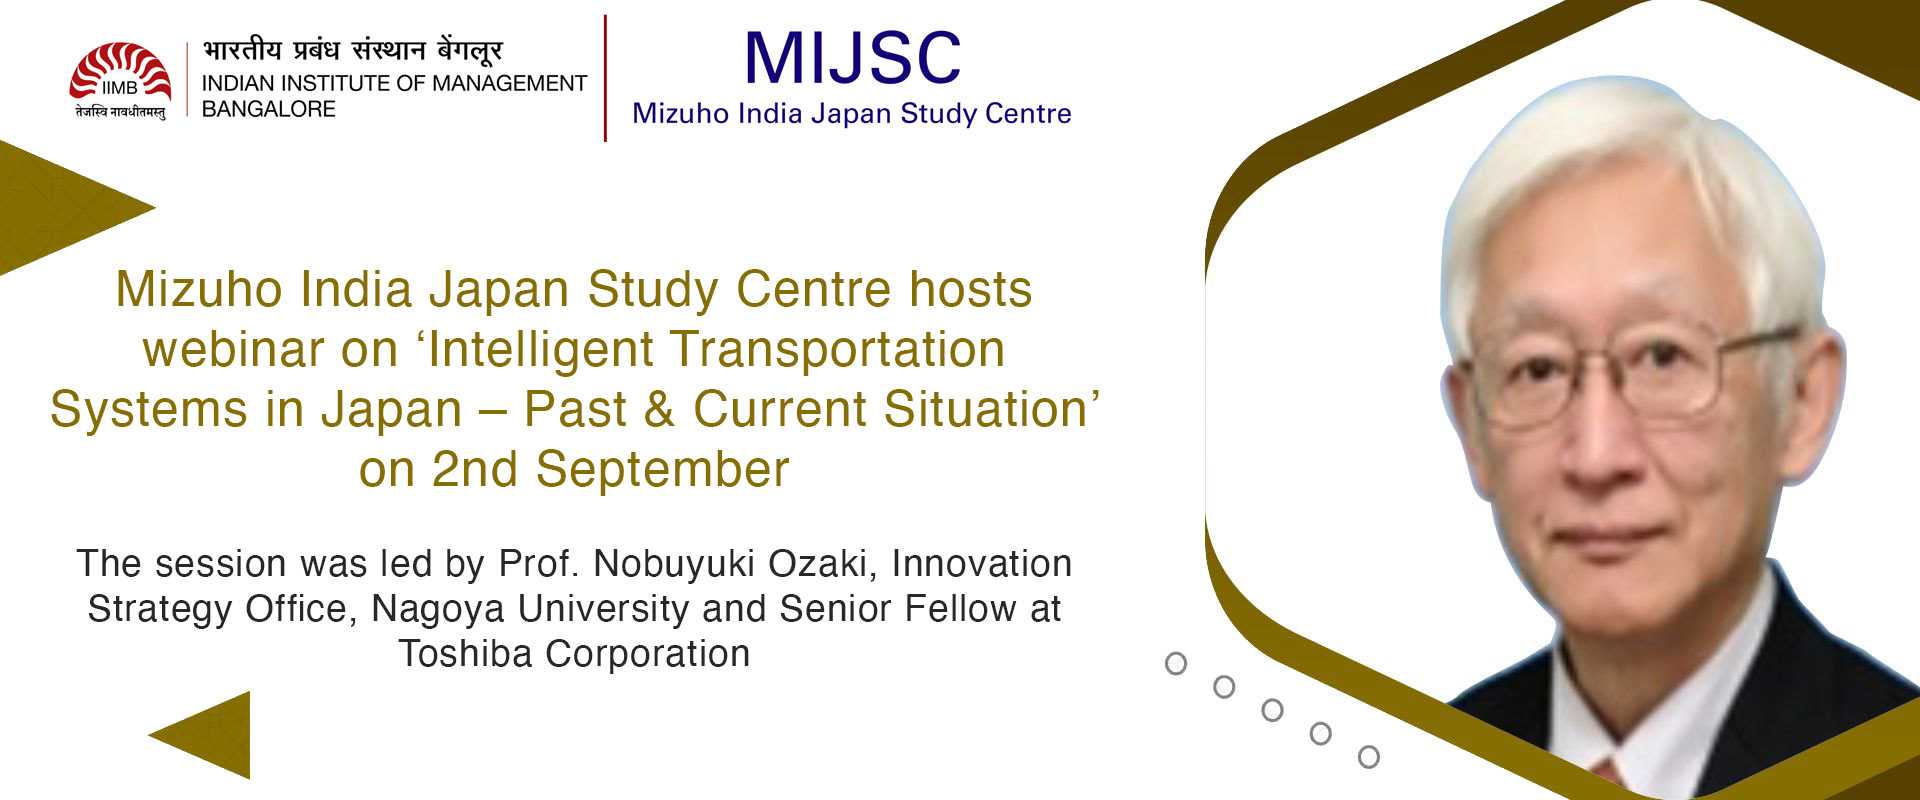 Mizuho India Japan Study Centre hosts webinar on ‘Intelligent Transportation Systems in Japan – Past & Current Situation’ on 2nd September